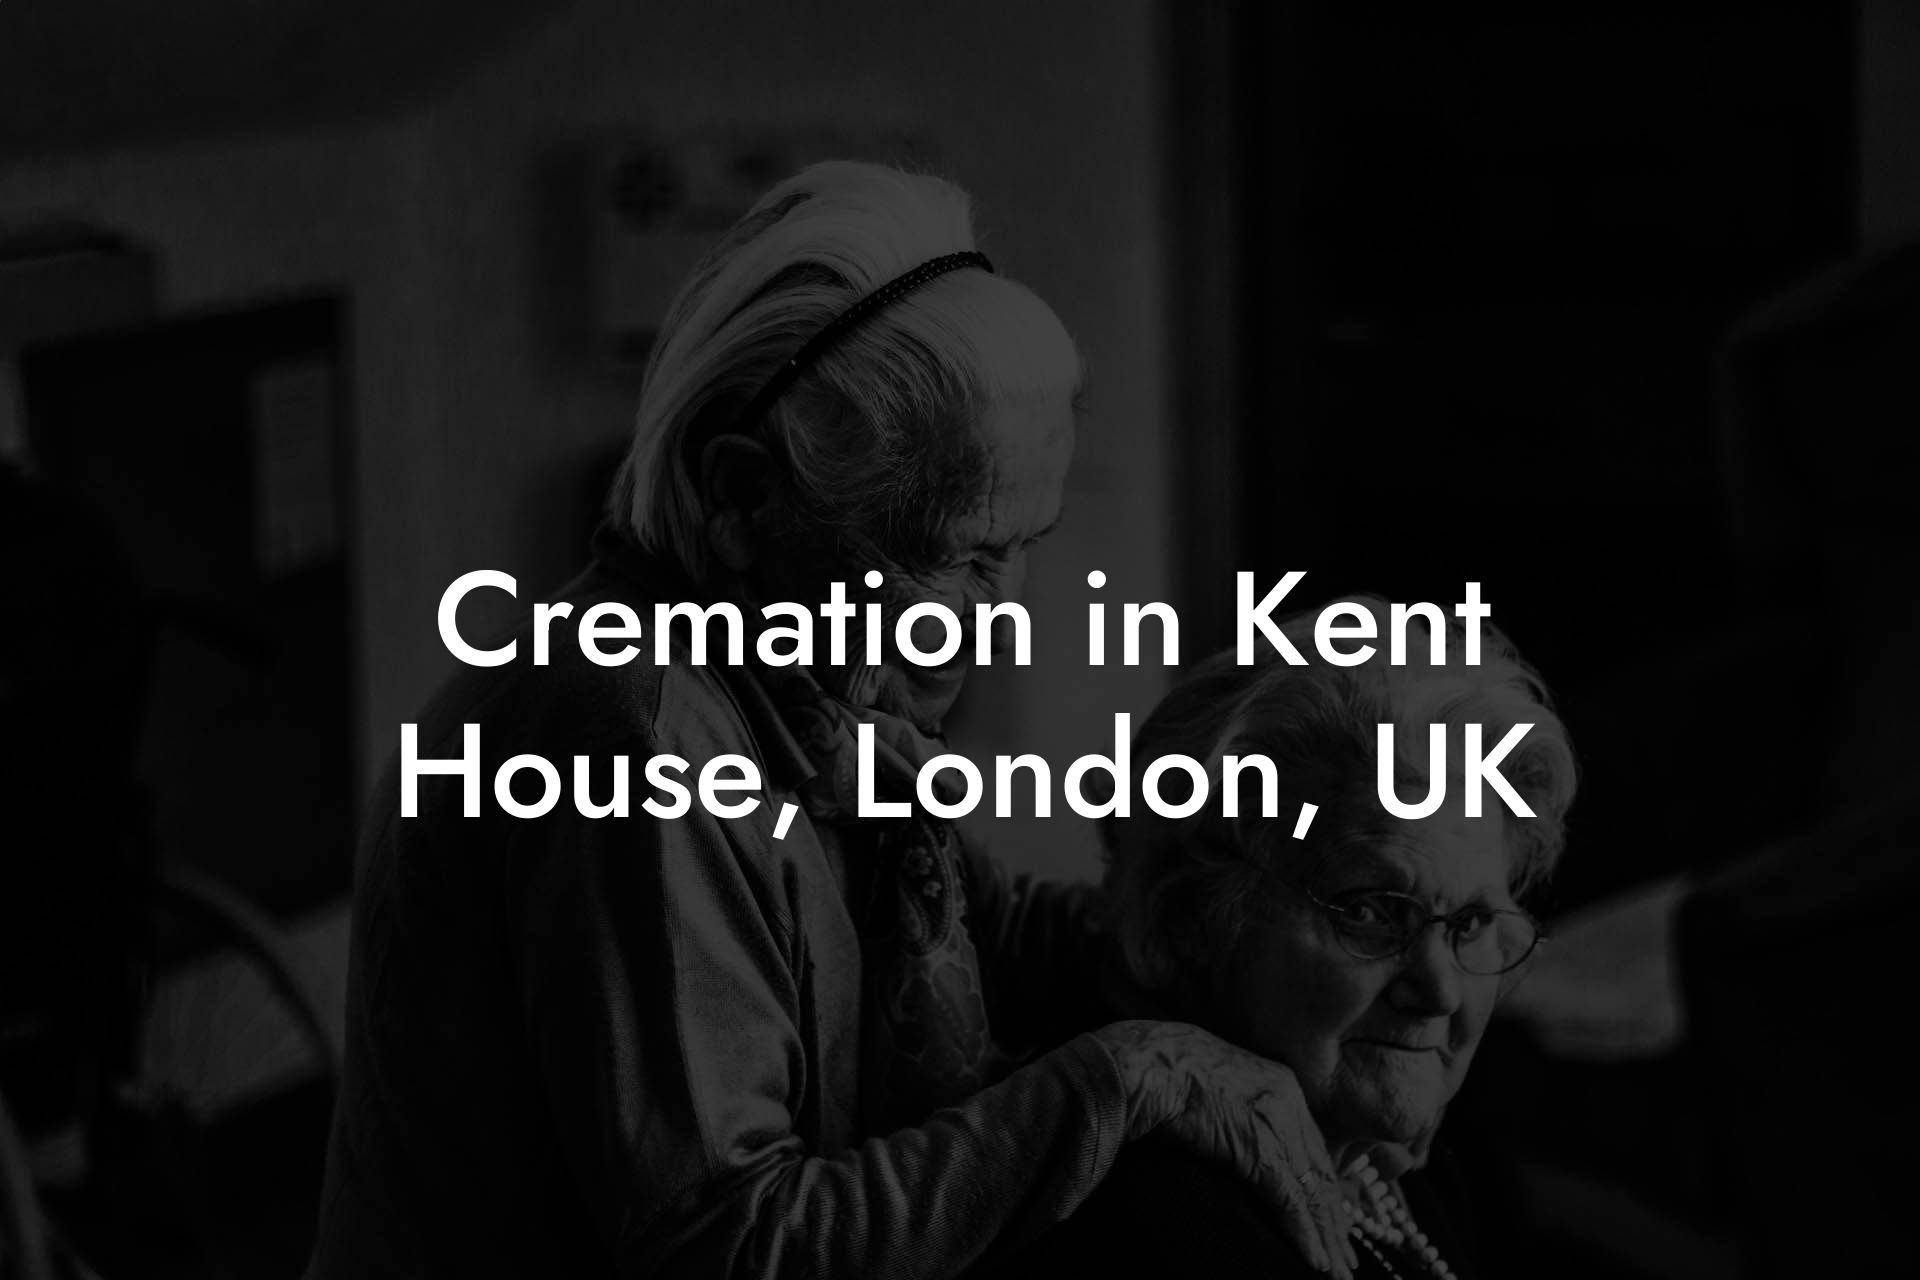 Cremation in Kent House, London, UK